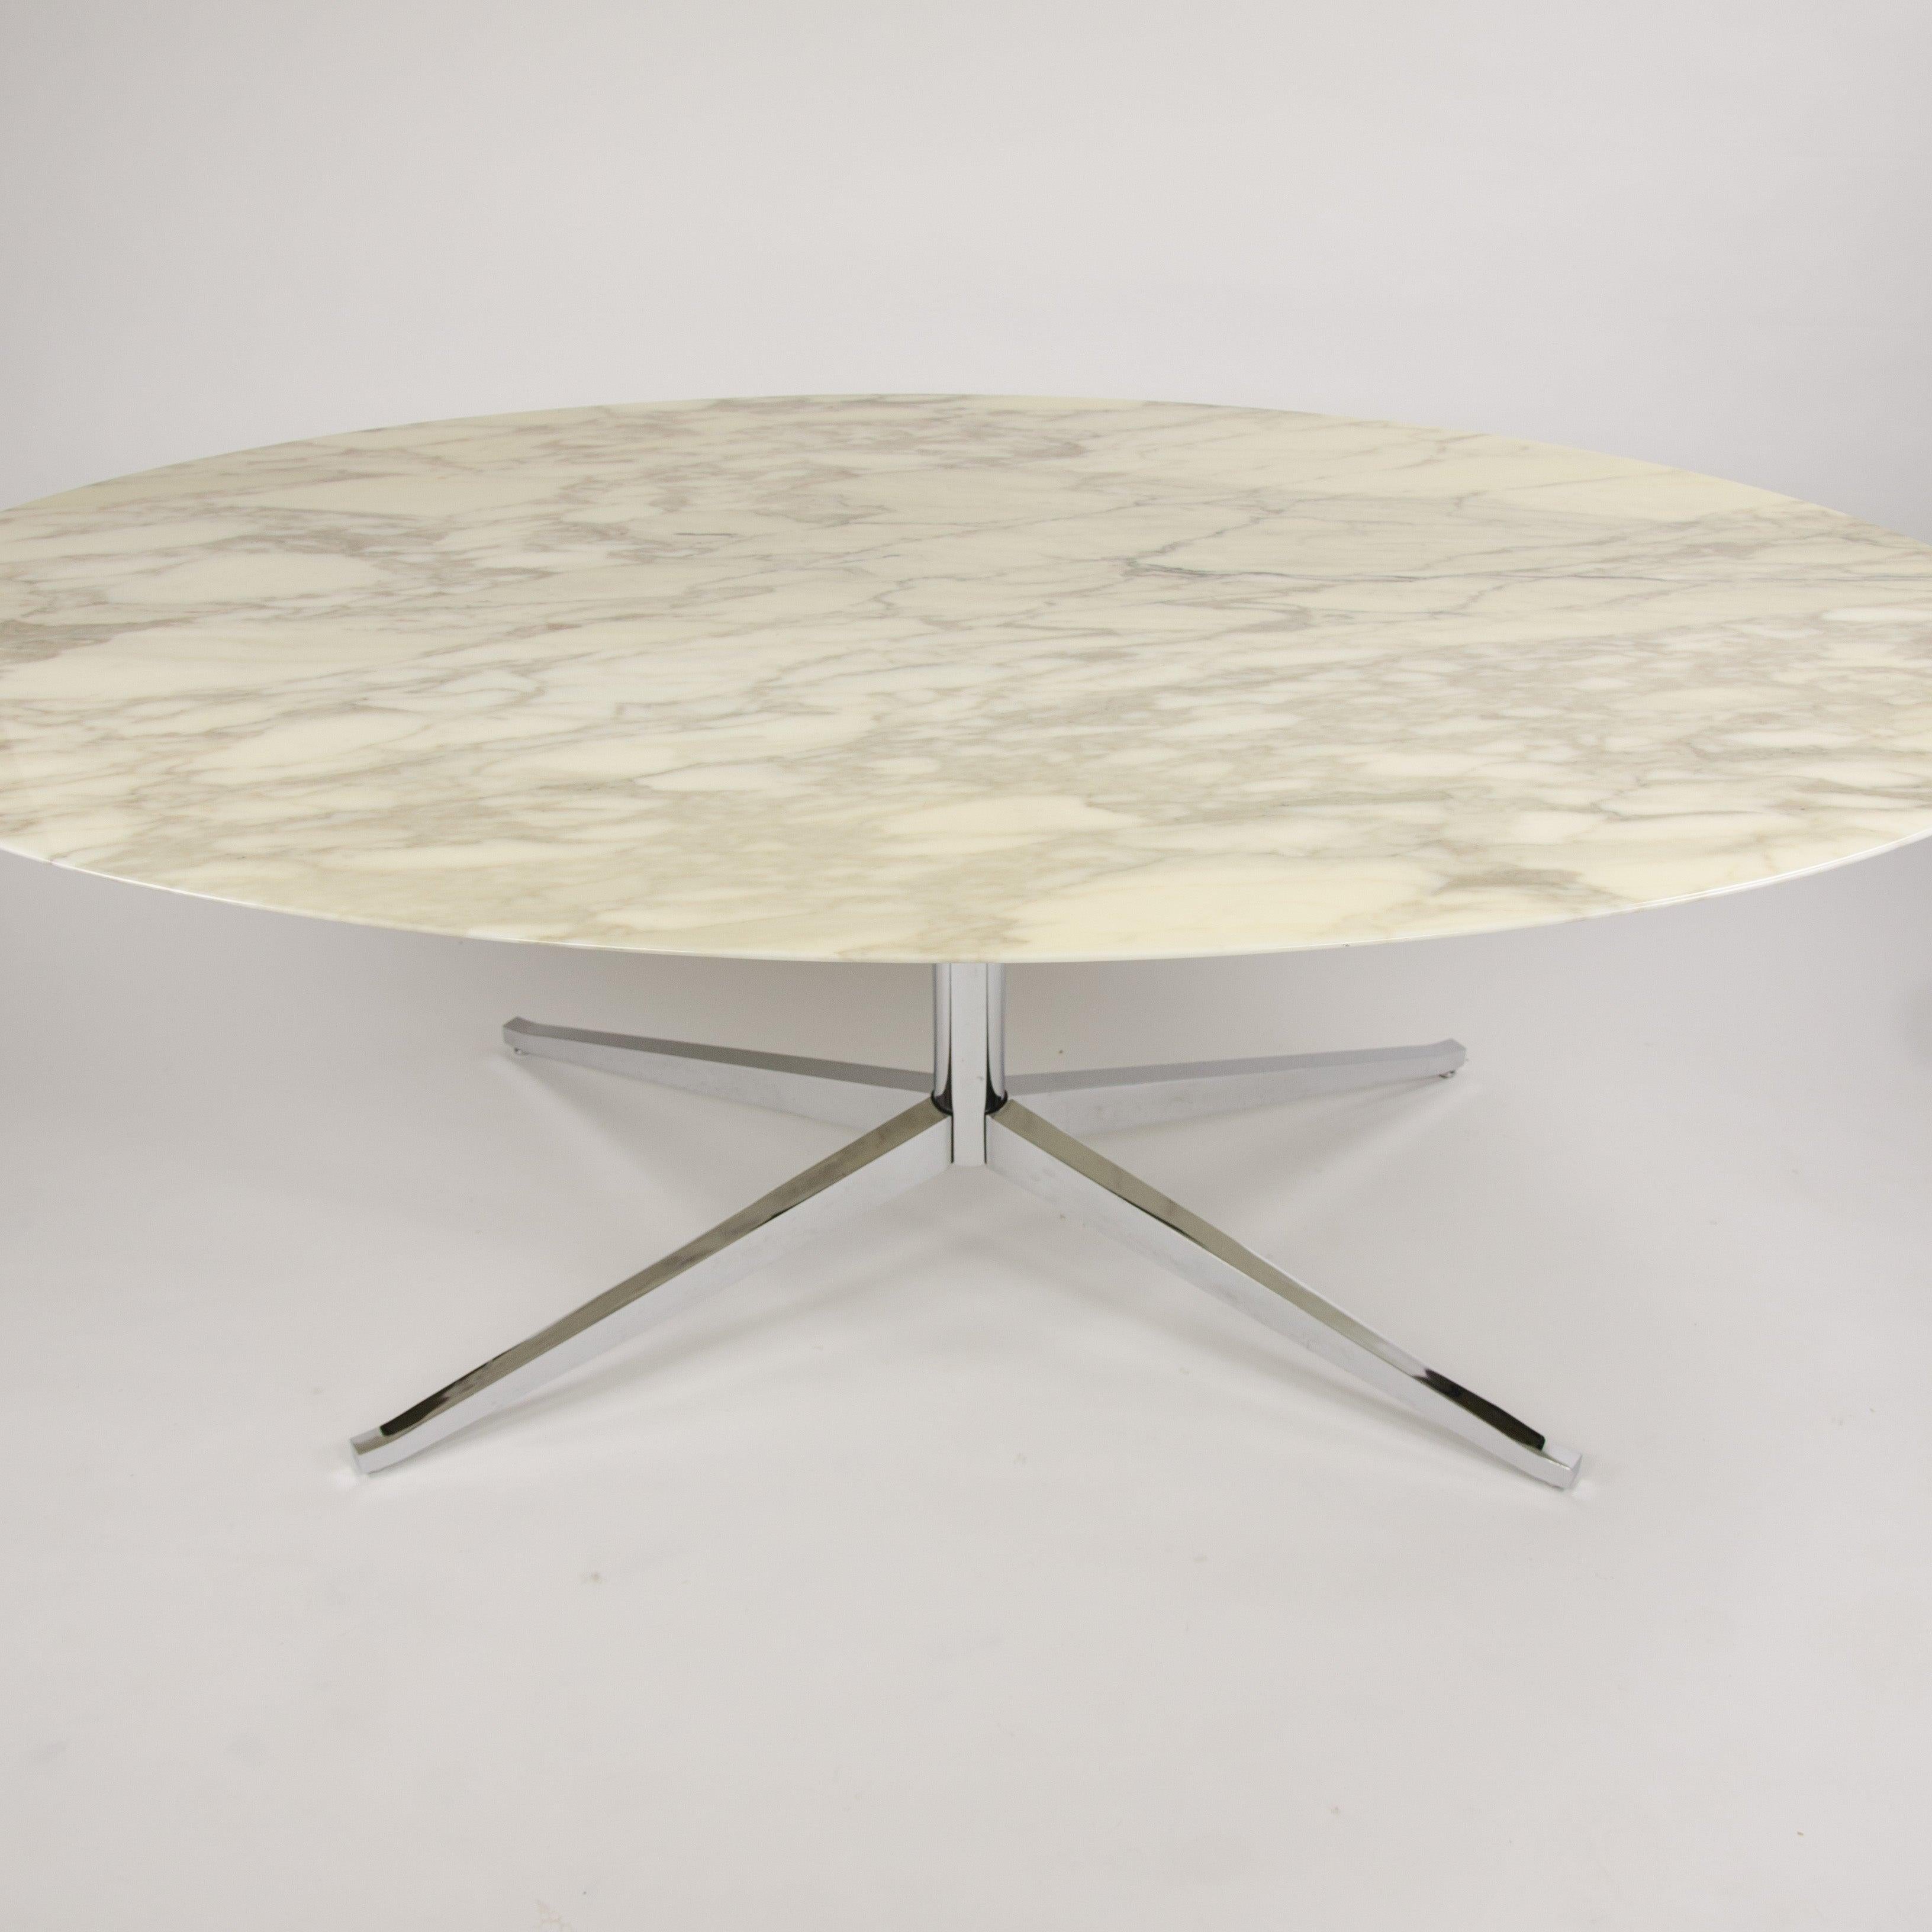 2007 Florence Knoll 78 in Calacatta Marble Dining Conference Table 2x Available en vente 3